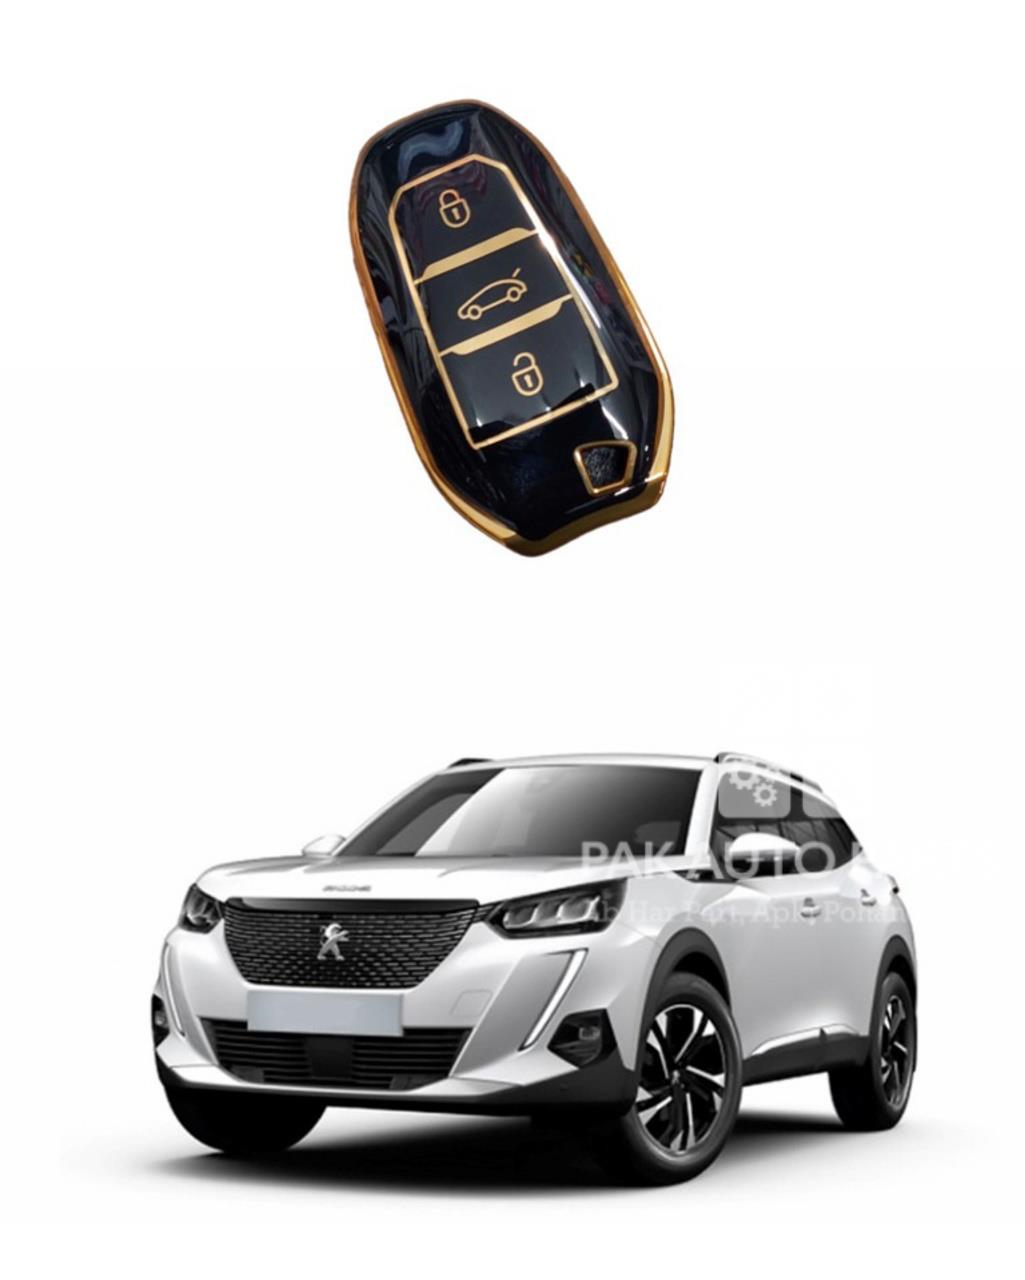 Picture of Peugeot 2008 TPU Remote Key Cover Case Protector, Black/Gold